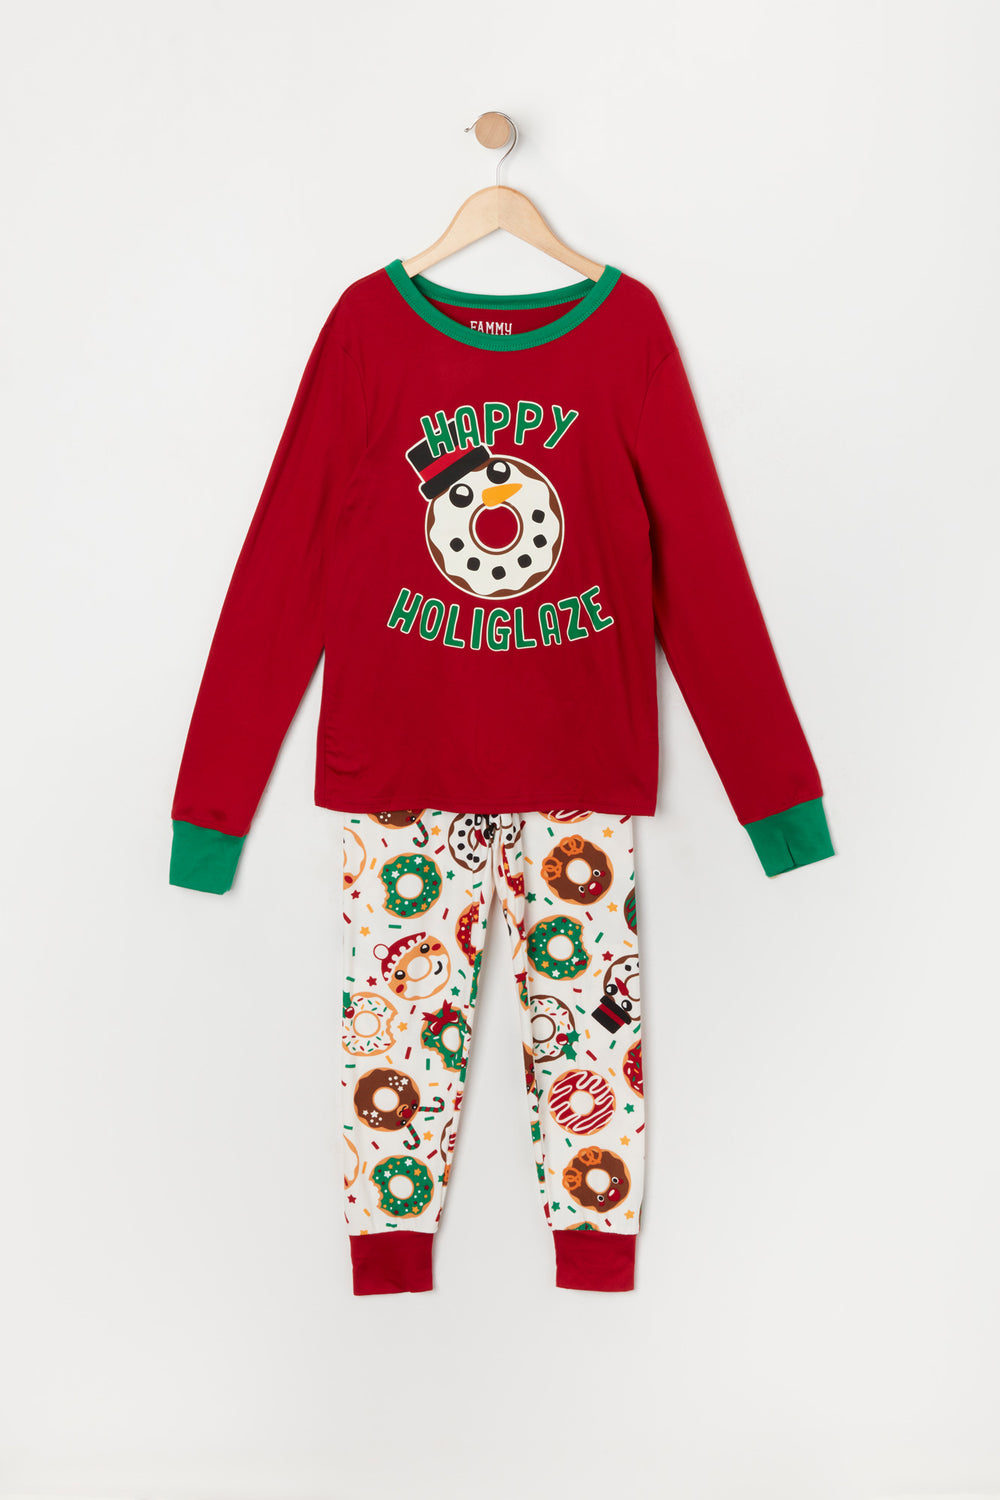 Youth Matching the Family Holiday Donut 2 Piece Pajama Set Youth Matching the Family Holiday Donut 2 Piece Pajama Set 2